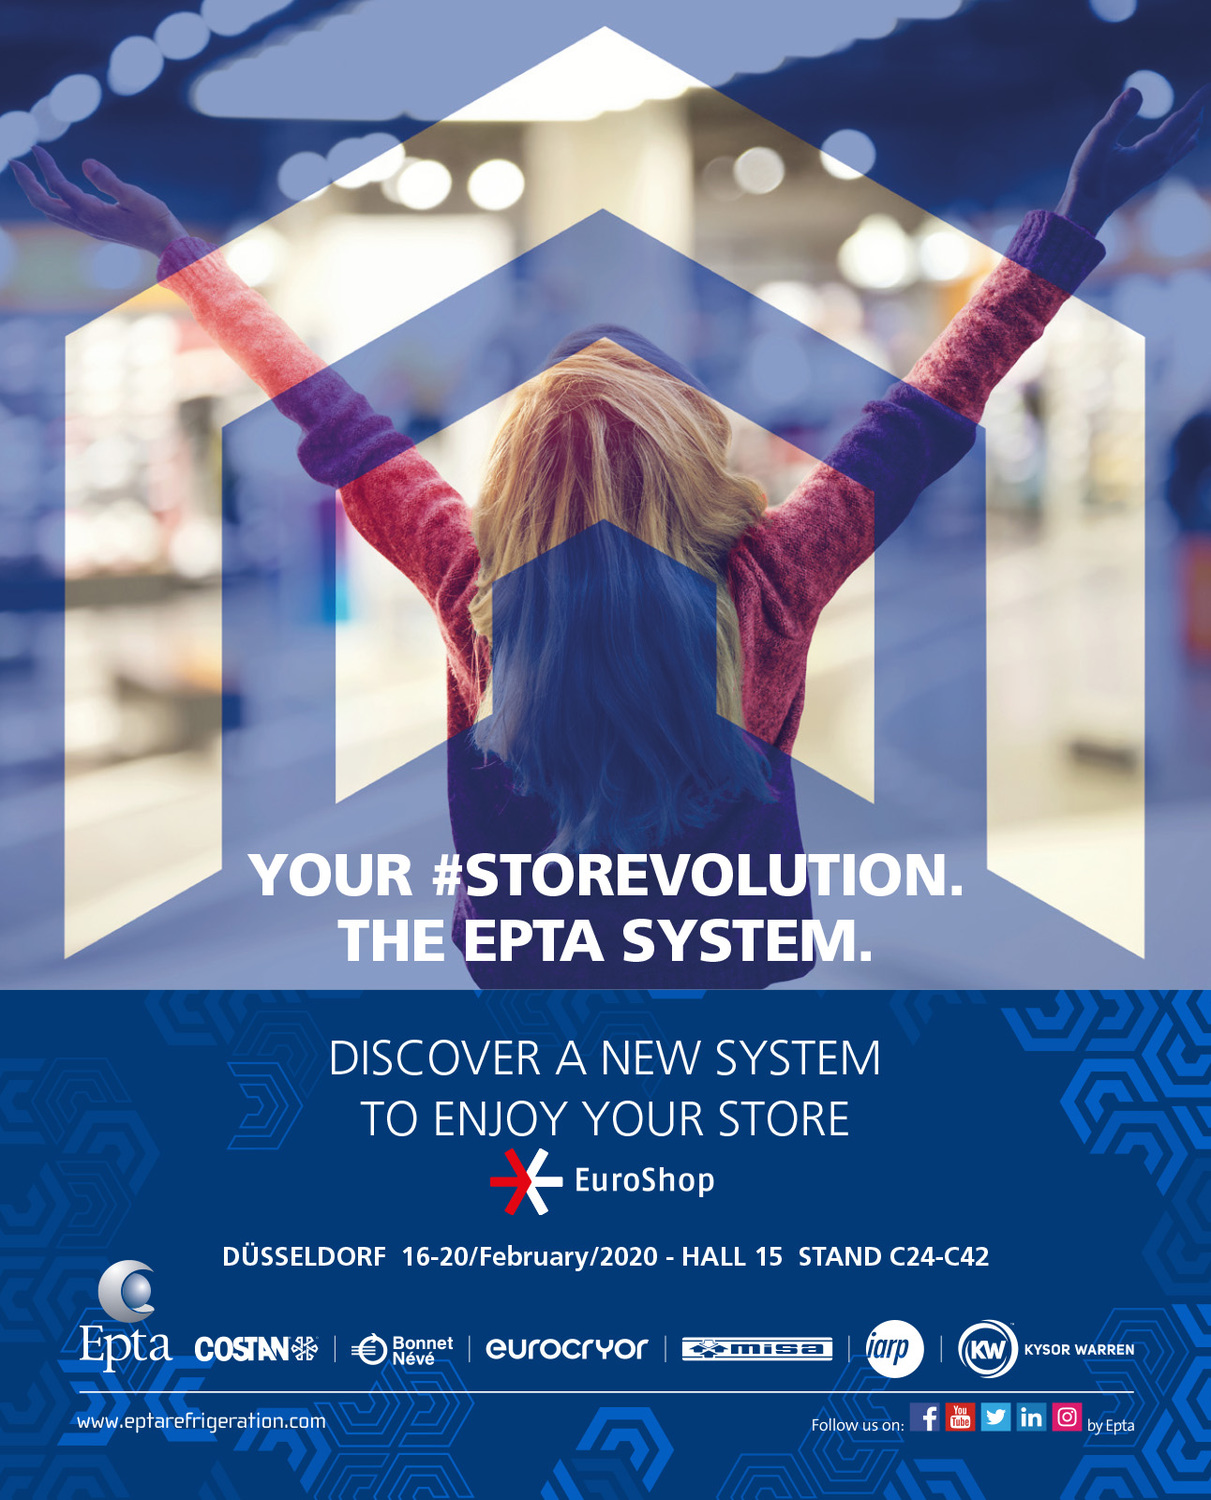 Epta @Euroshop 2020: discover a new system to enjoy your store